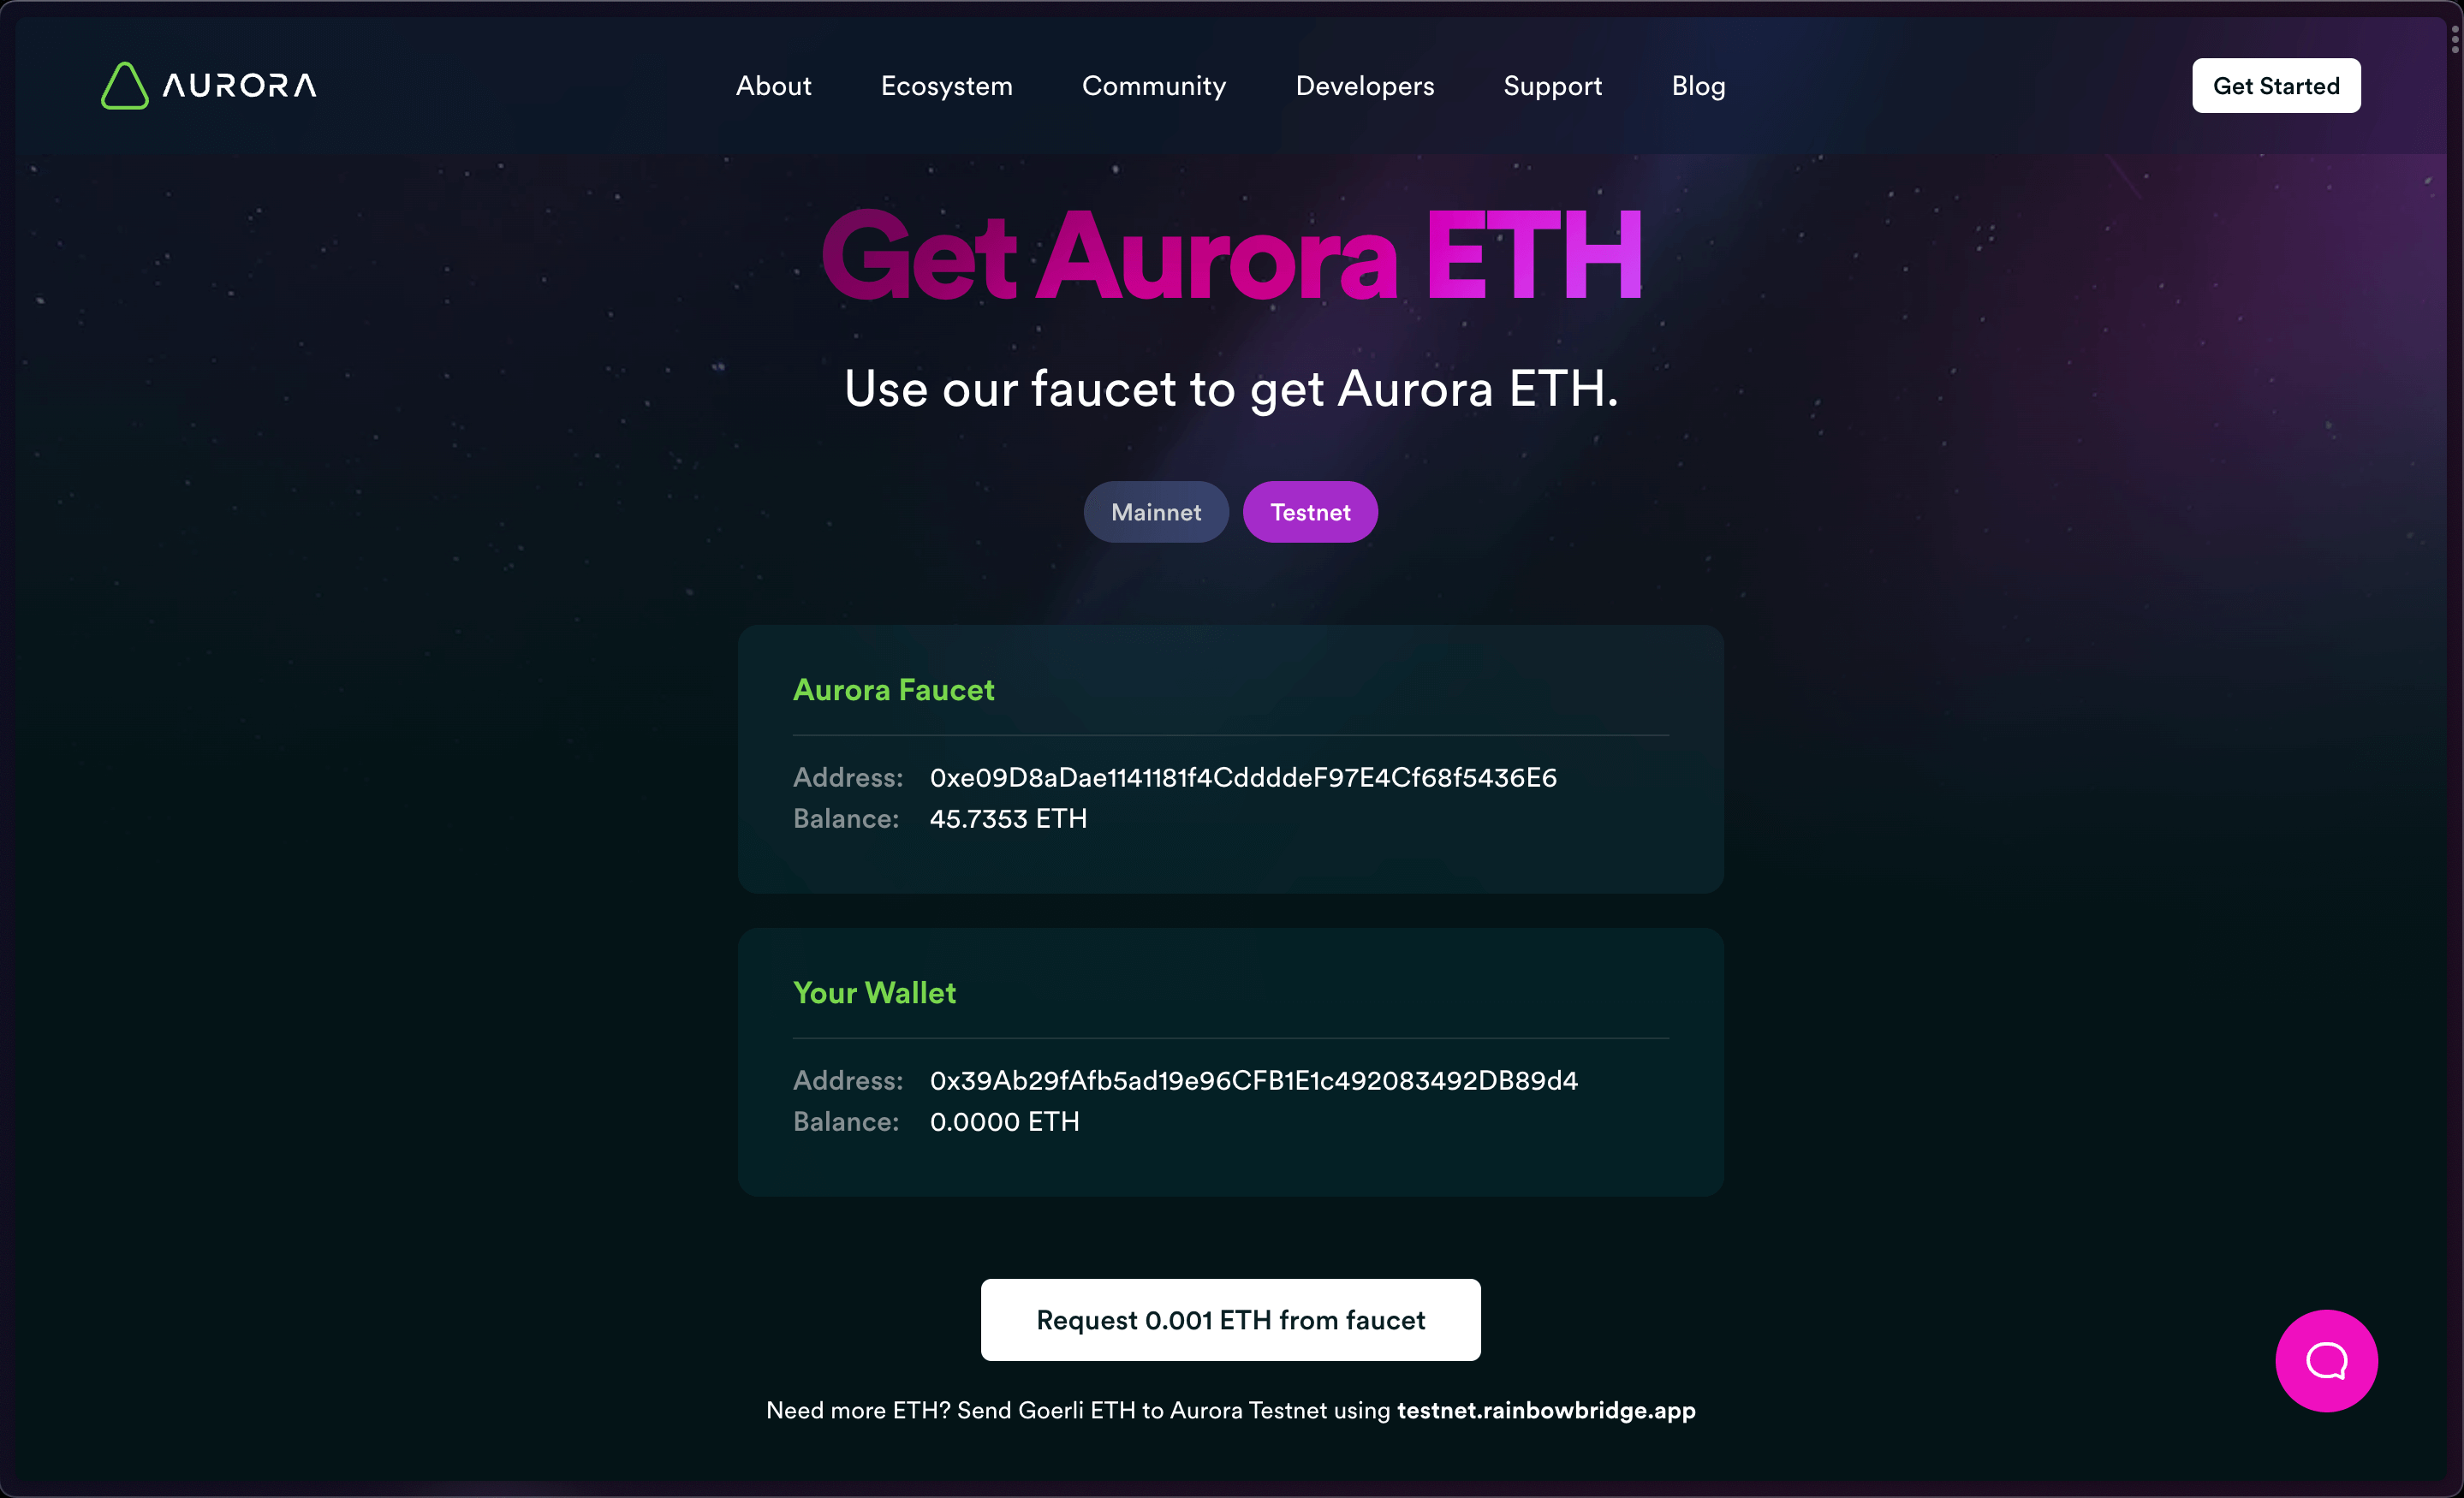 Request 0.001 ETH from Aurora faucet